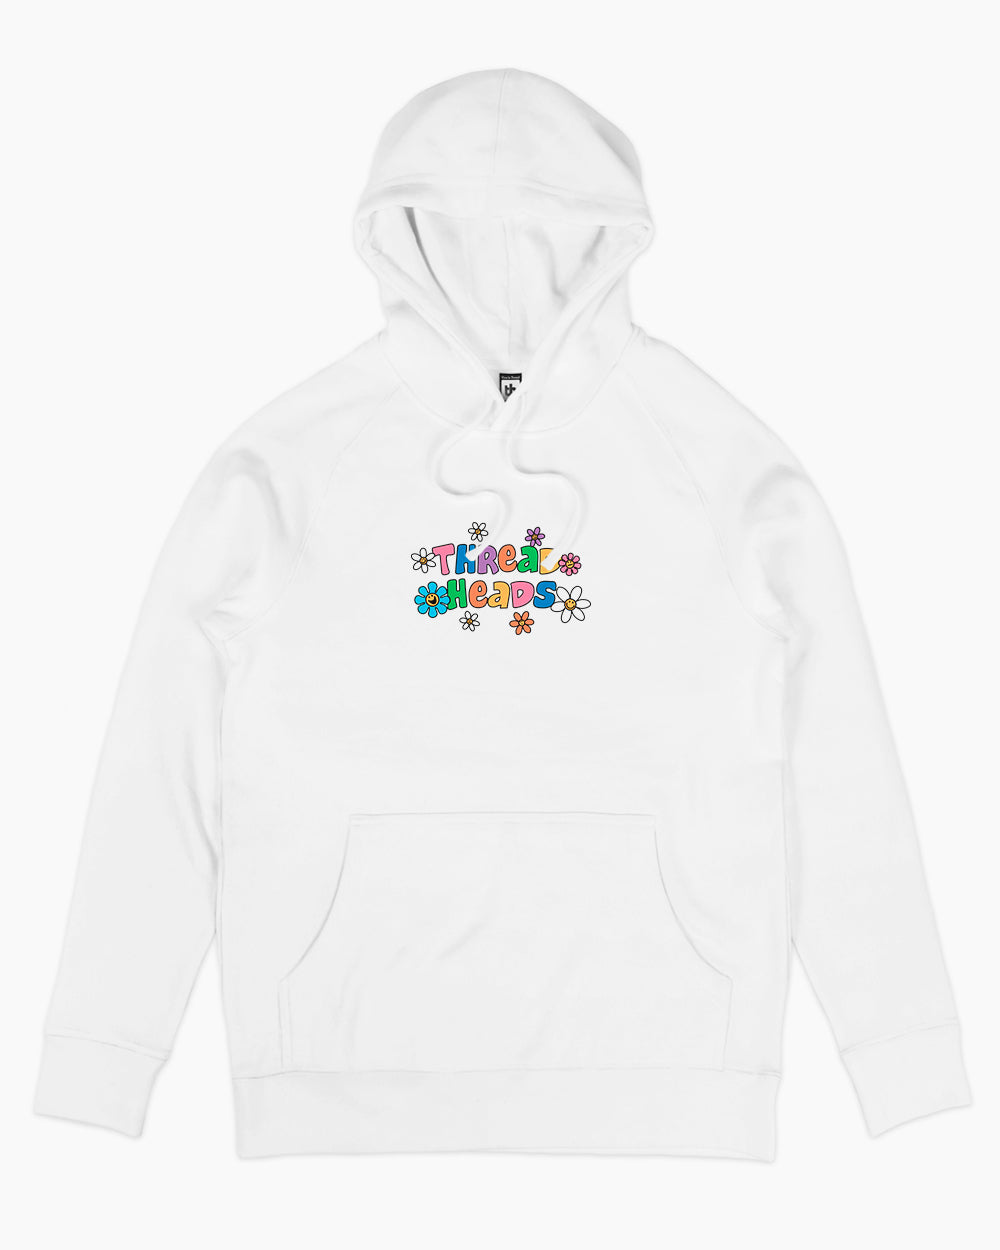 Too Blessed to be Stressed Hoodie Australia Online #colour_white